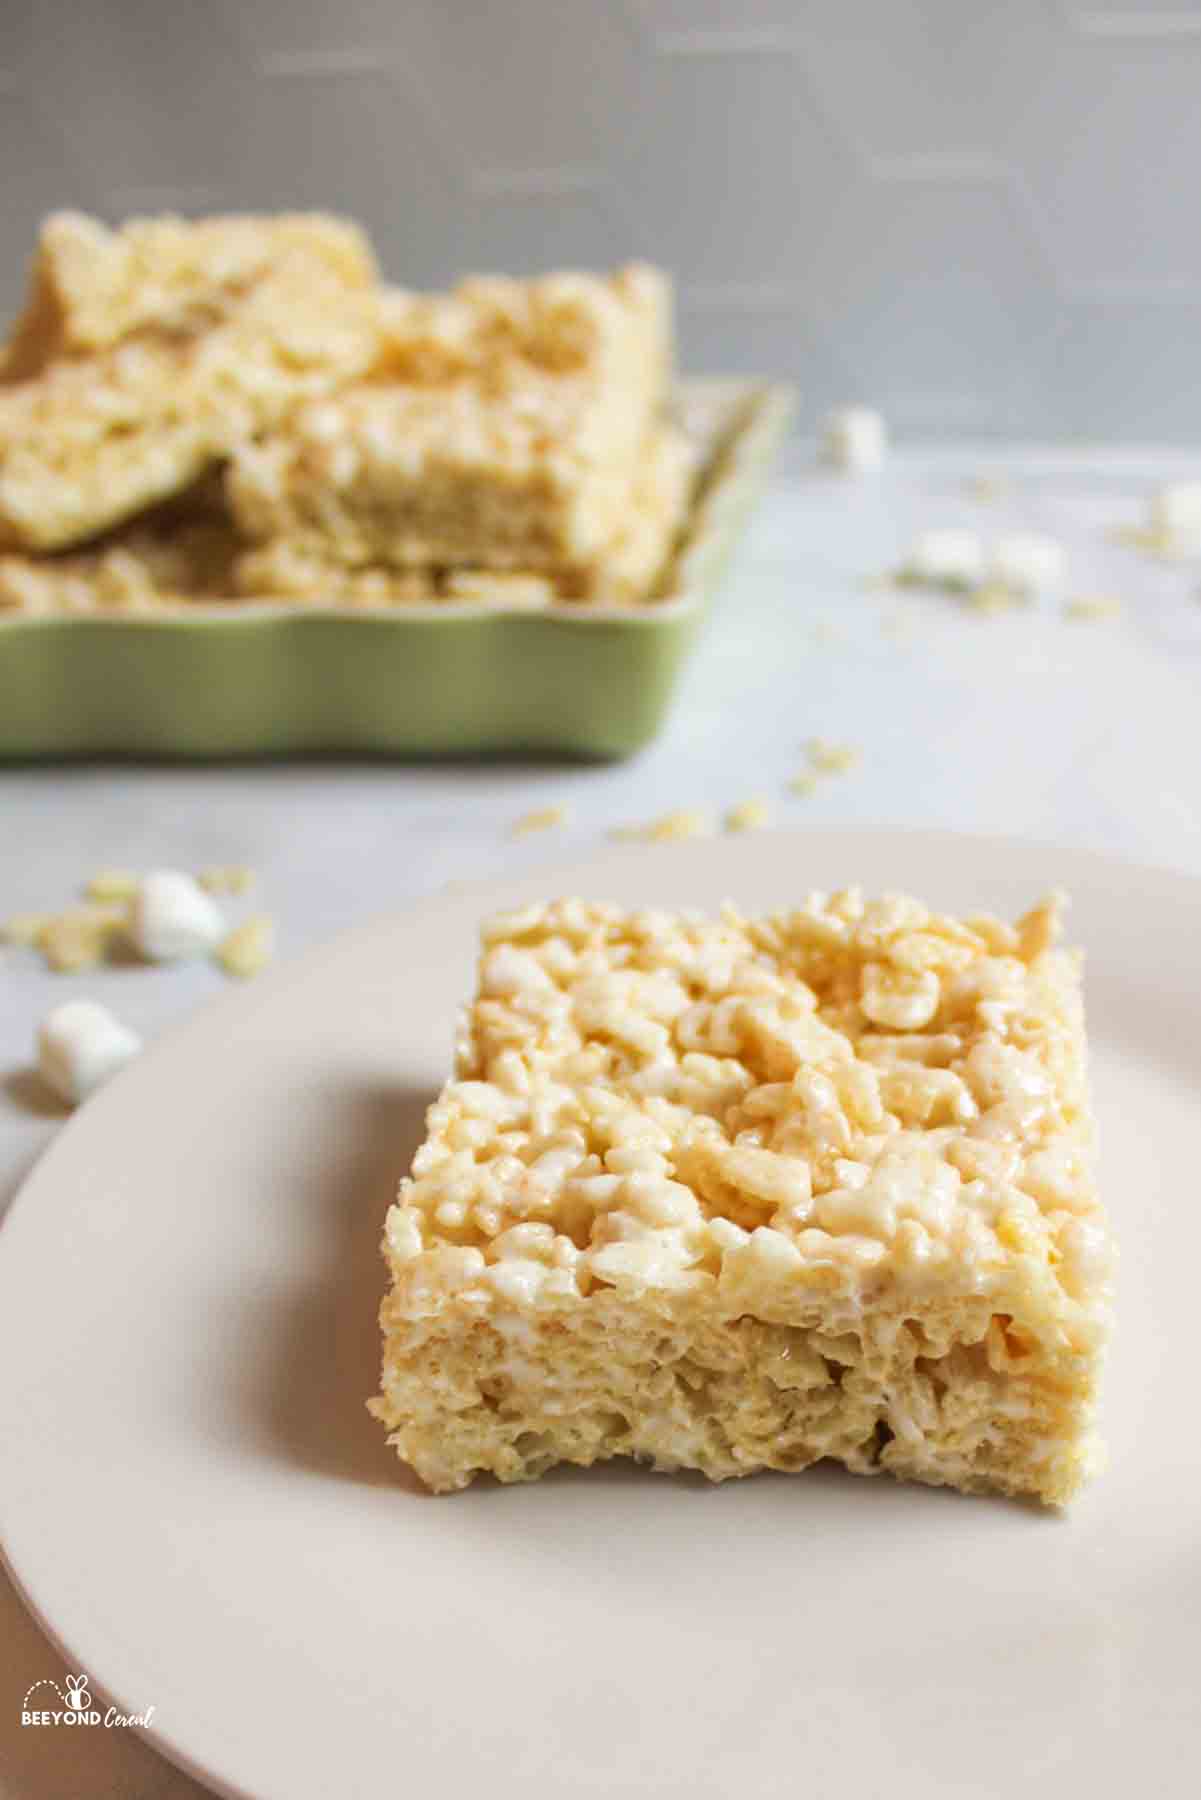 coconut oil rice krispies in a dish in background with a slice in front